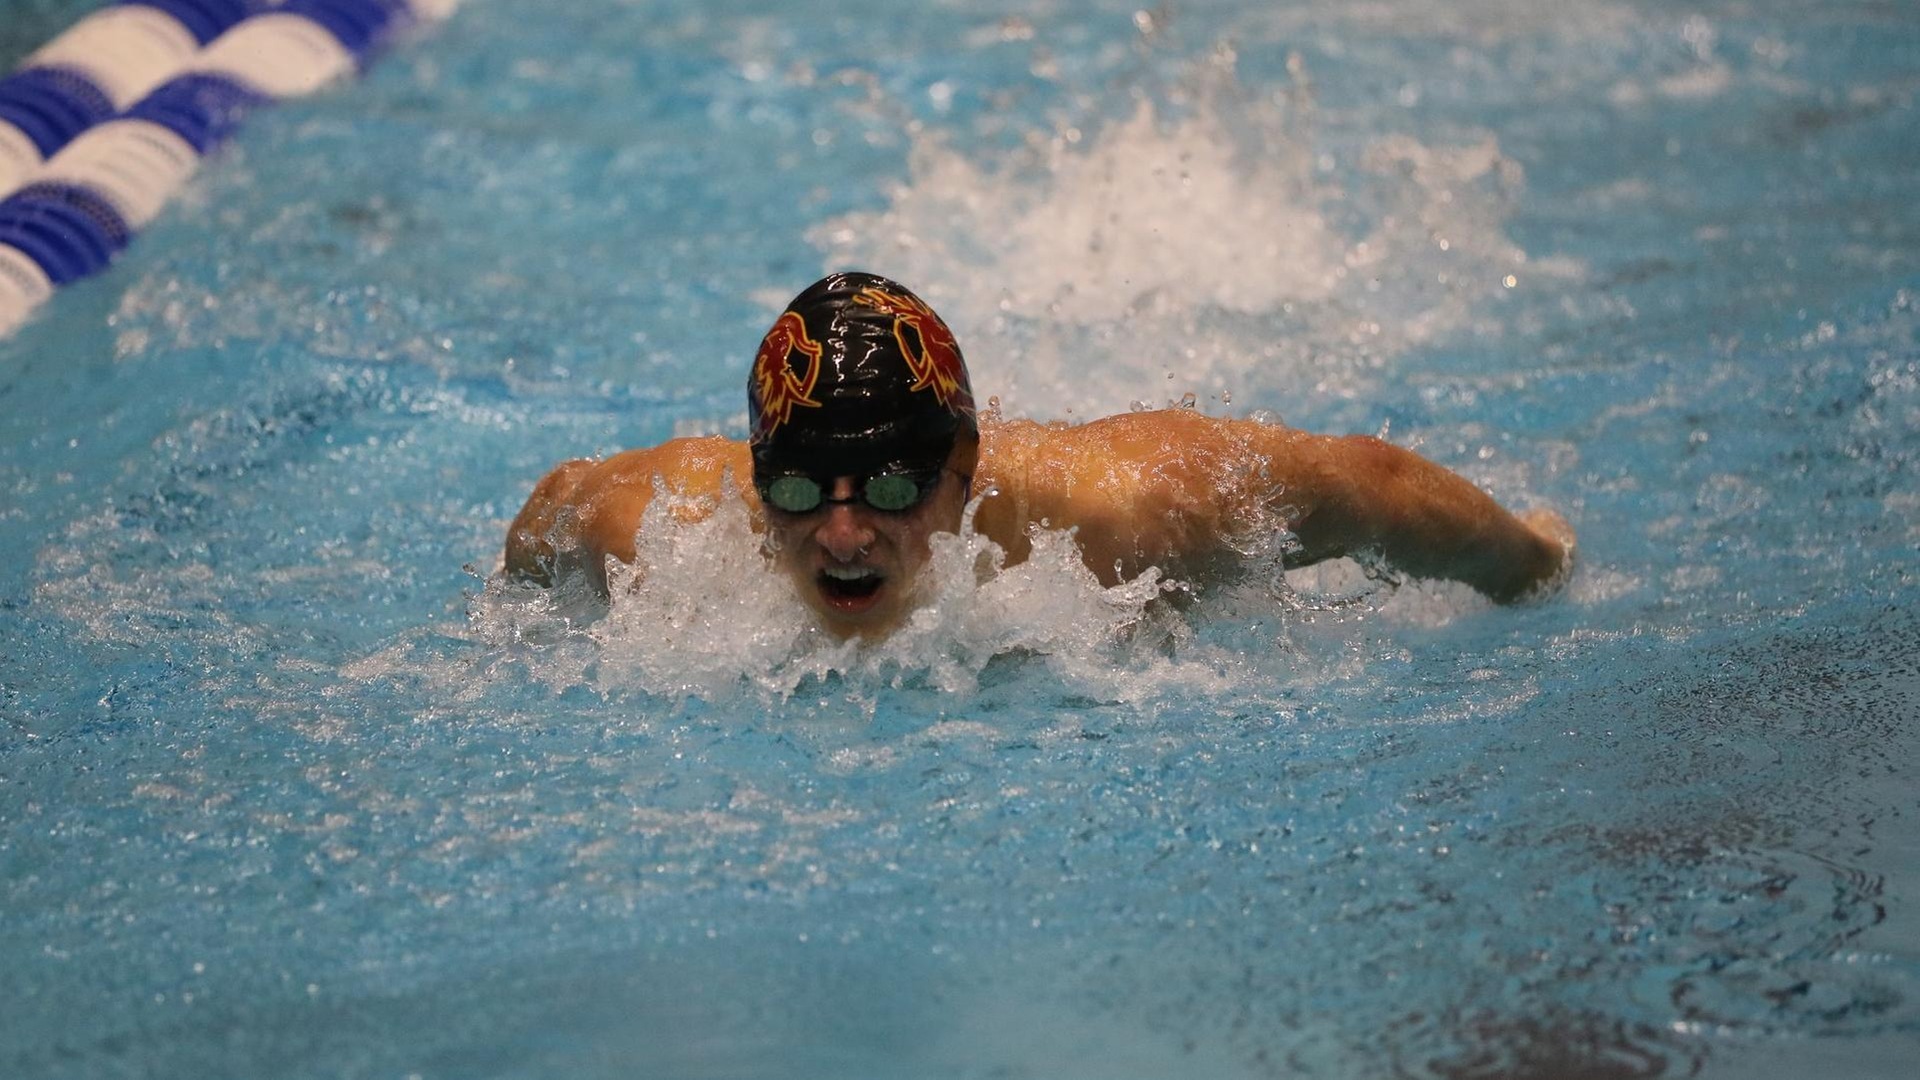 Frank Applebaum on his way to an NCAA record in the 200 fly (photo by Aaron Gray)